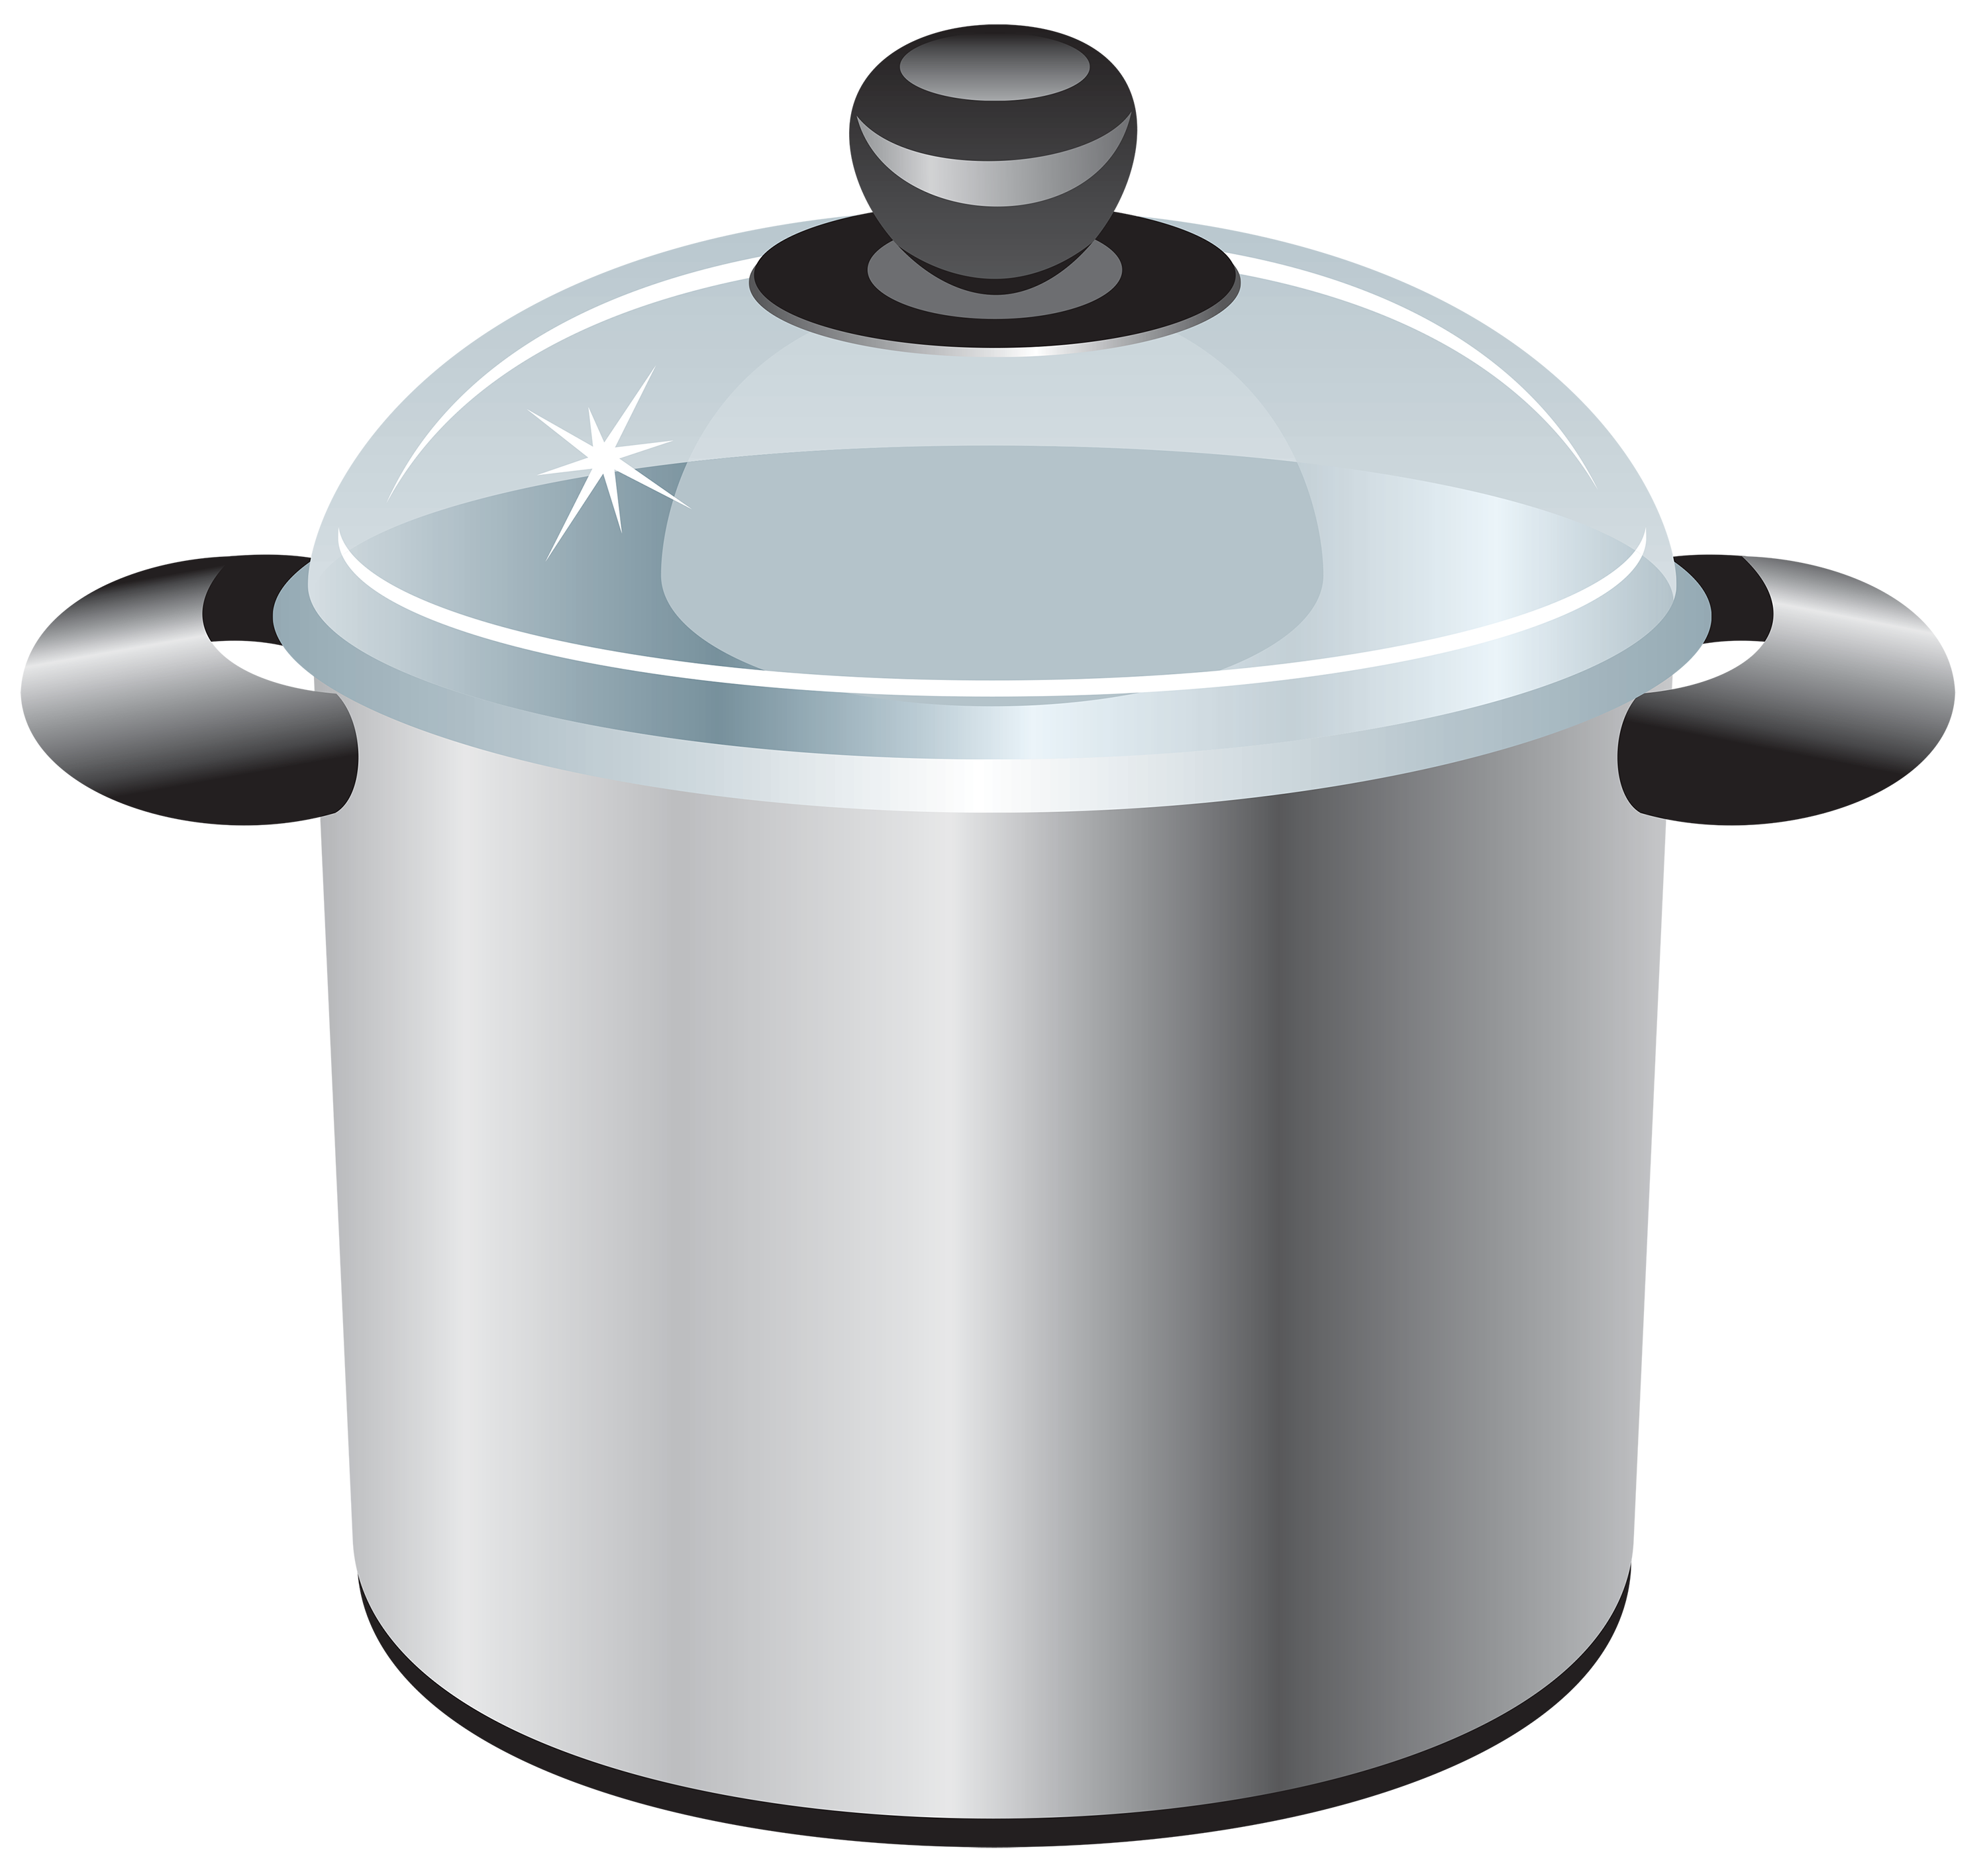 Dirty Pots And Pans PNG - 166588